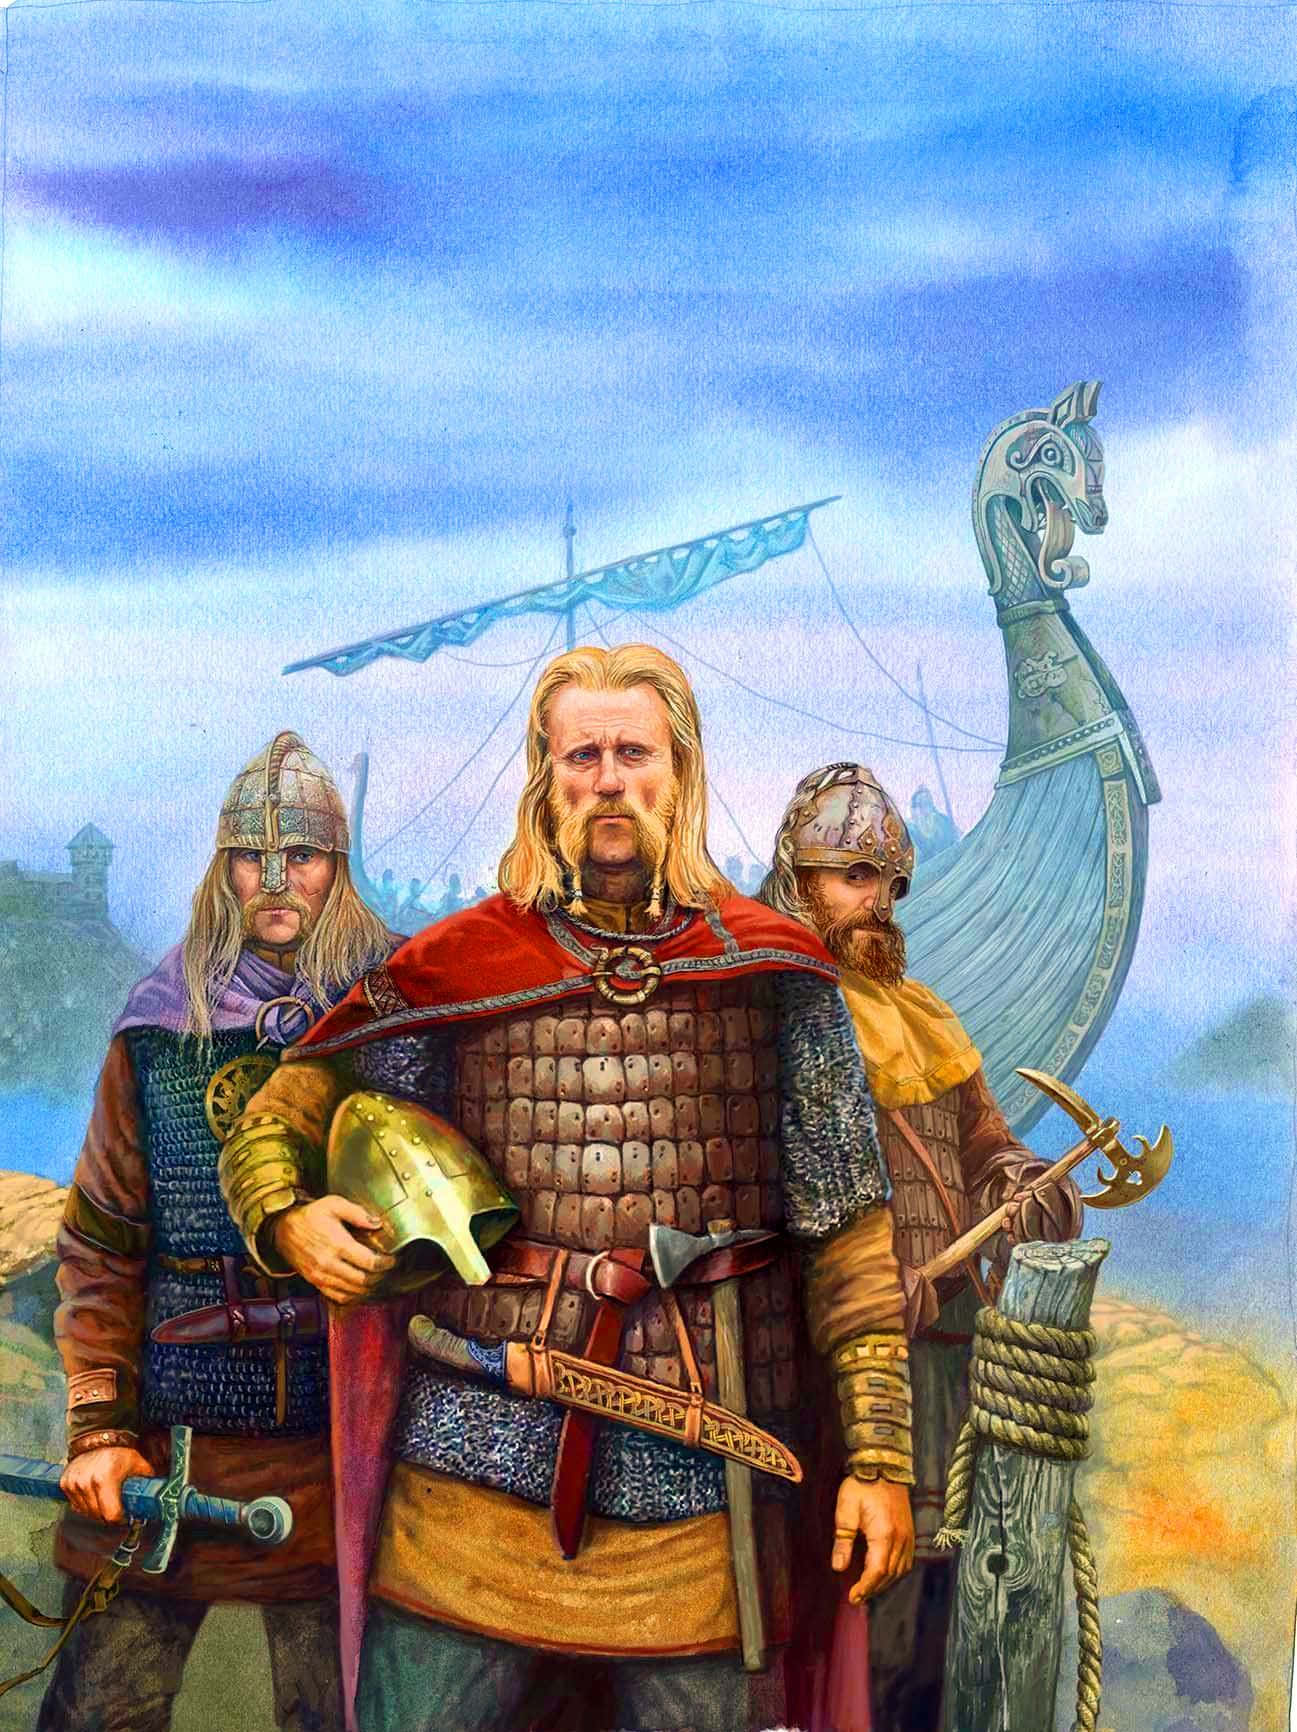 A fierce Viking standing proudly on a cliff, with a longboat in the background.